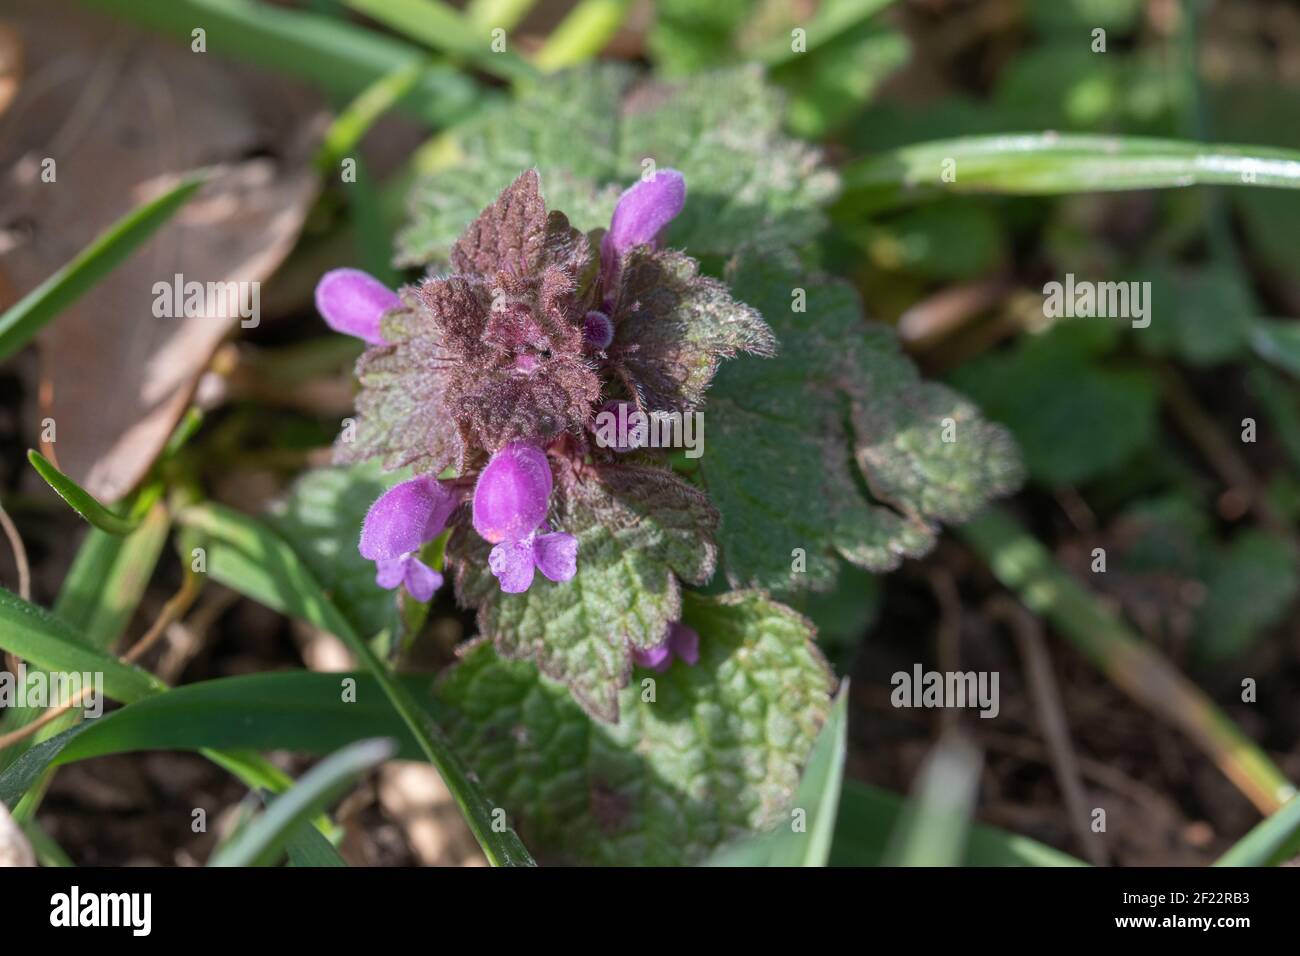 The purple dead nettle, Lamium purpureum, blooms in early spring. She is a wildflower and medicinal herb. Stock Photo